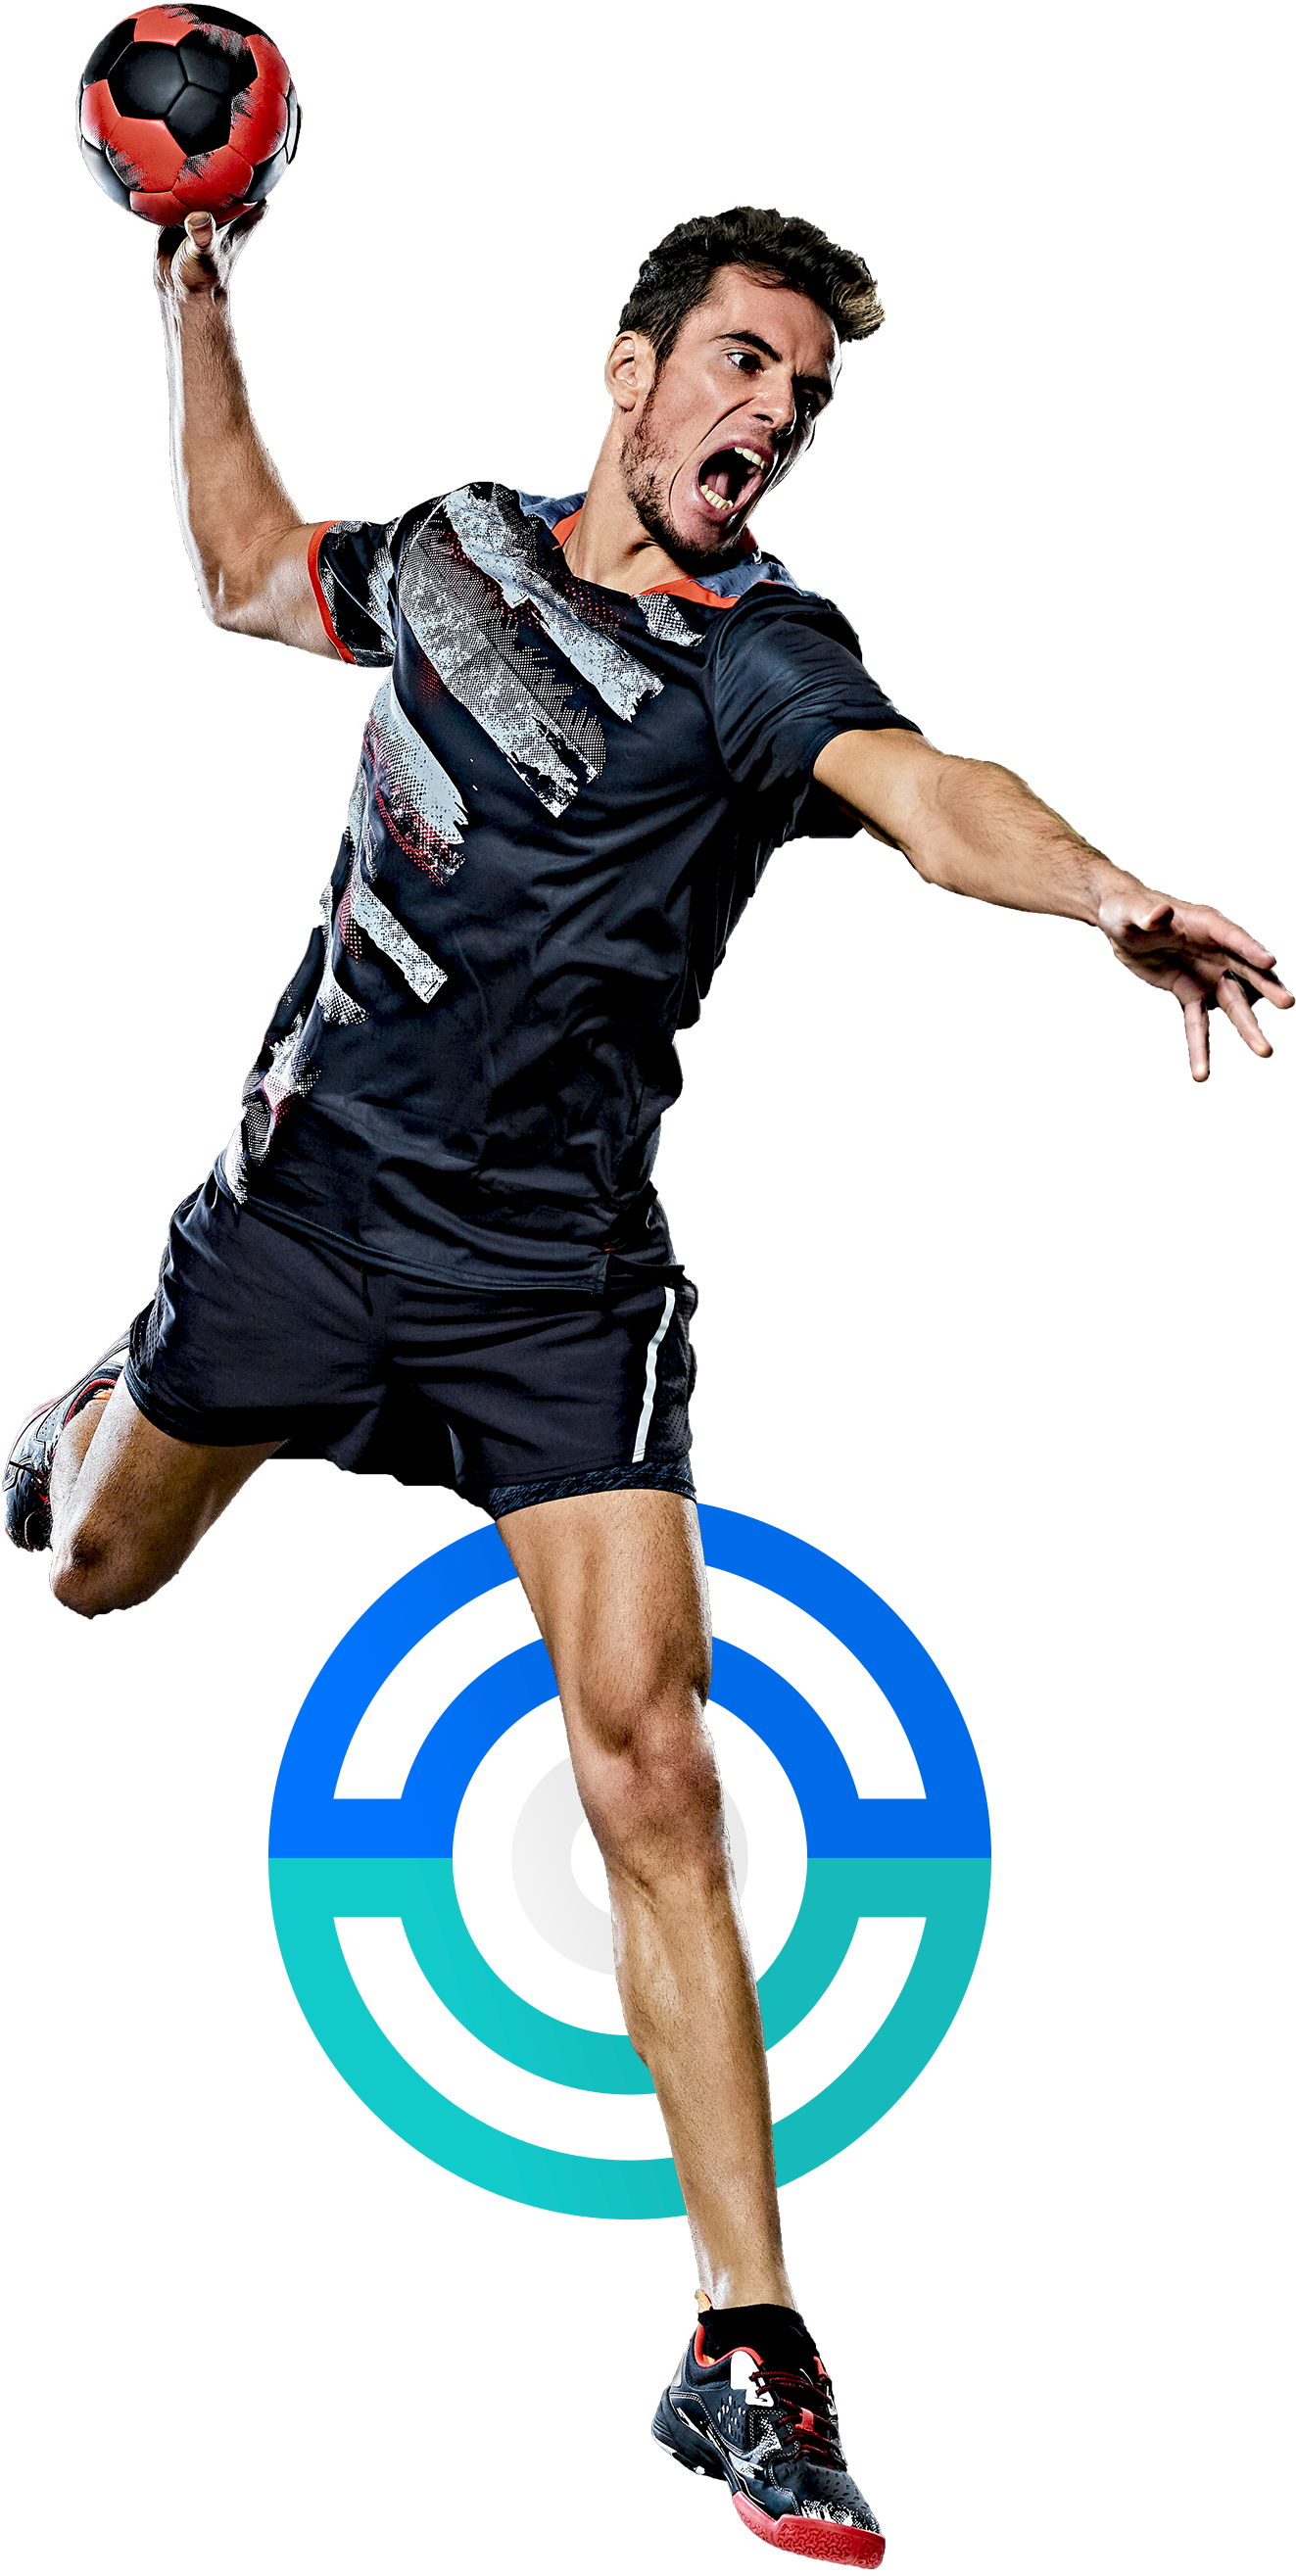 In the picture, a male handball player, holds a ball with their hands to throw it.